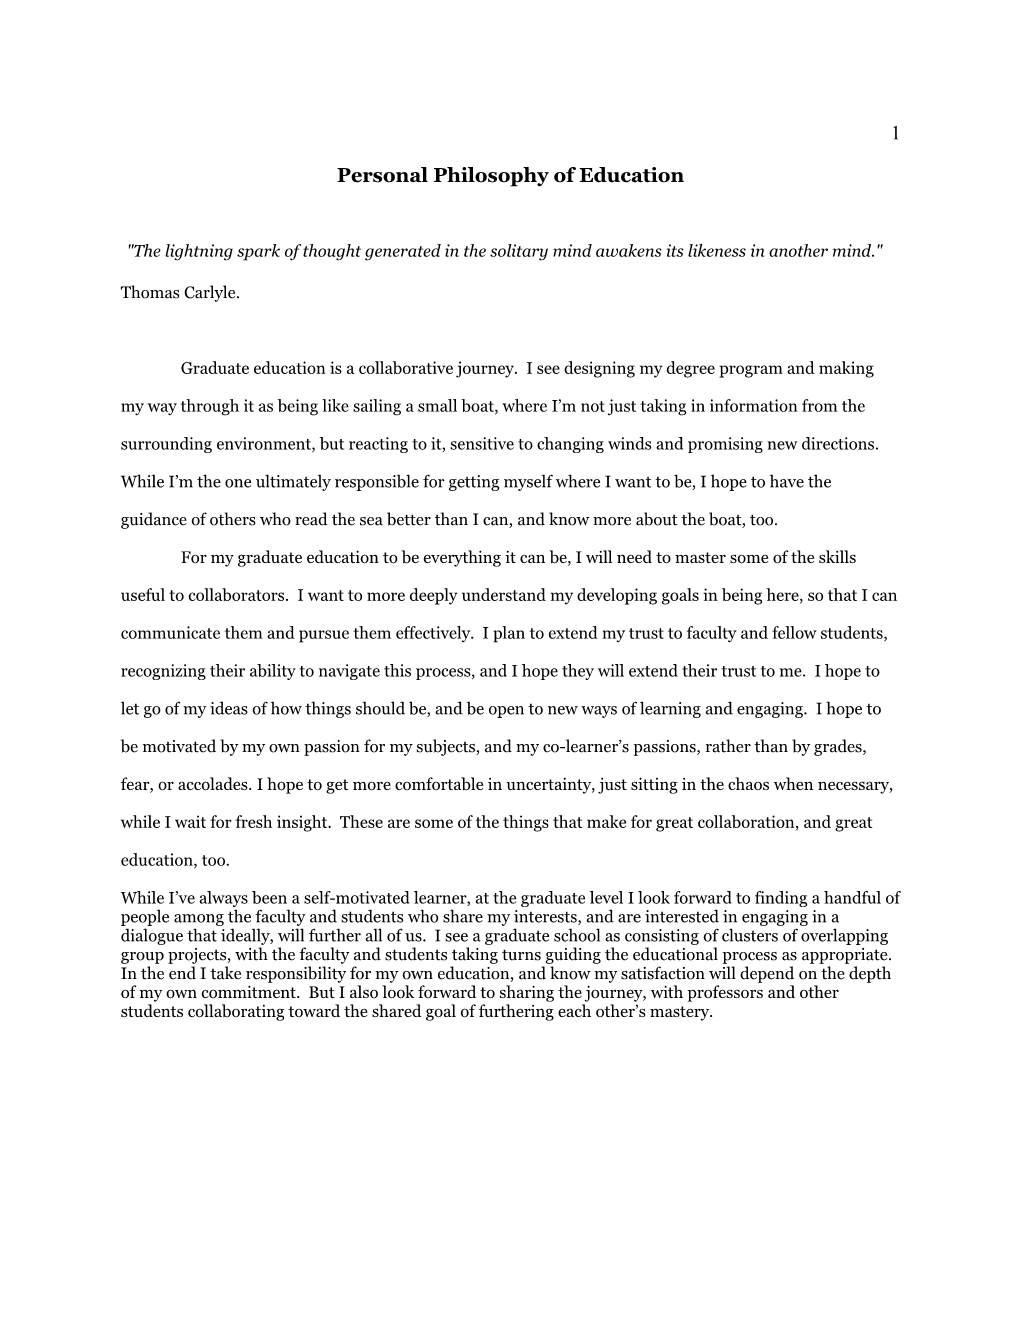 Personal Philosophy of Education